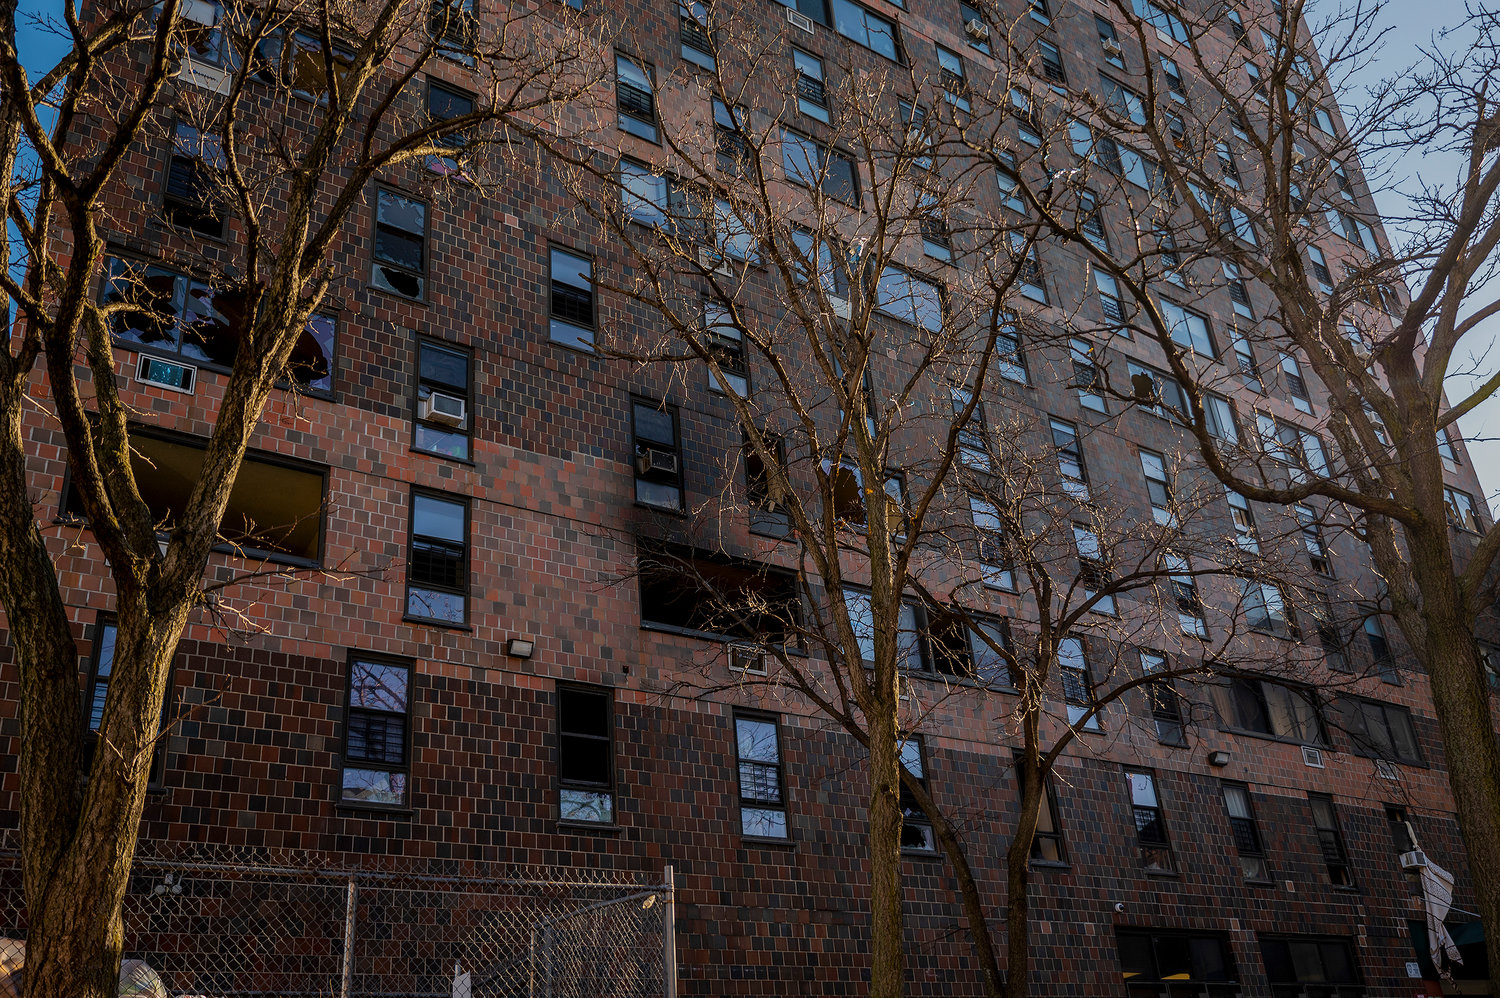 The Fordham Heights fire that claimed 17 lives and left 32 others hospitalized last in January was started by a space heater, according to investigators. However, those same fire officials also point out the blaze spread quickly through the East 181st Street apartment building because self-closing doors failed to close.